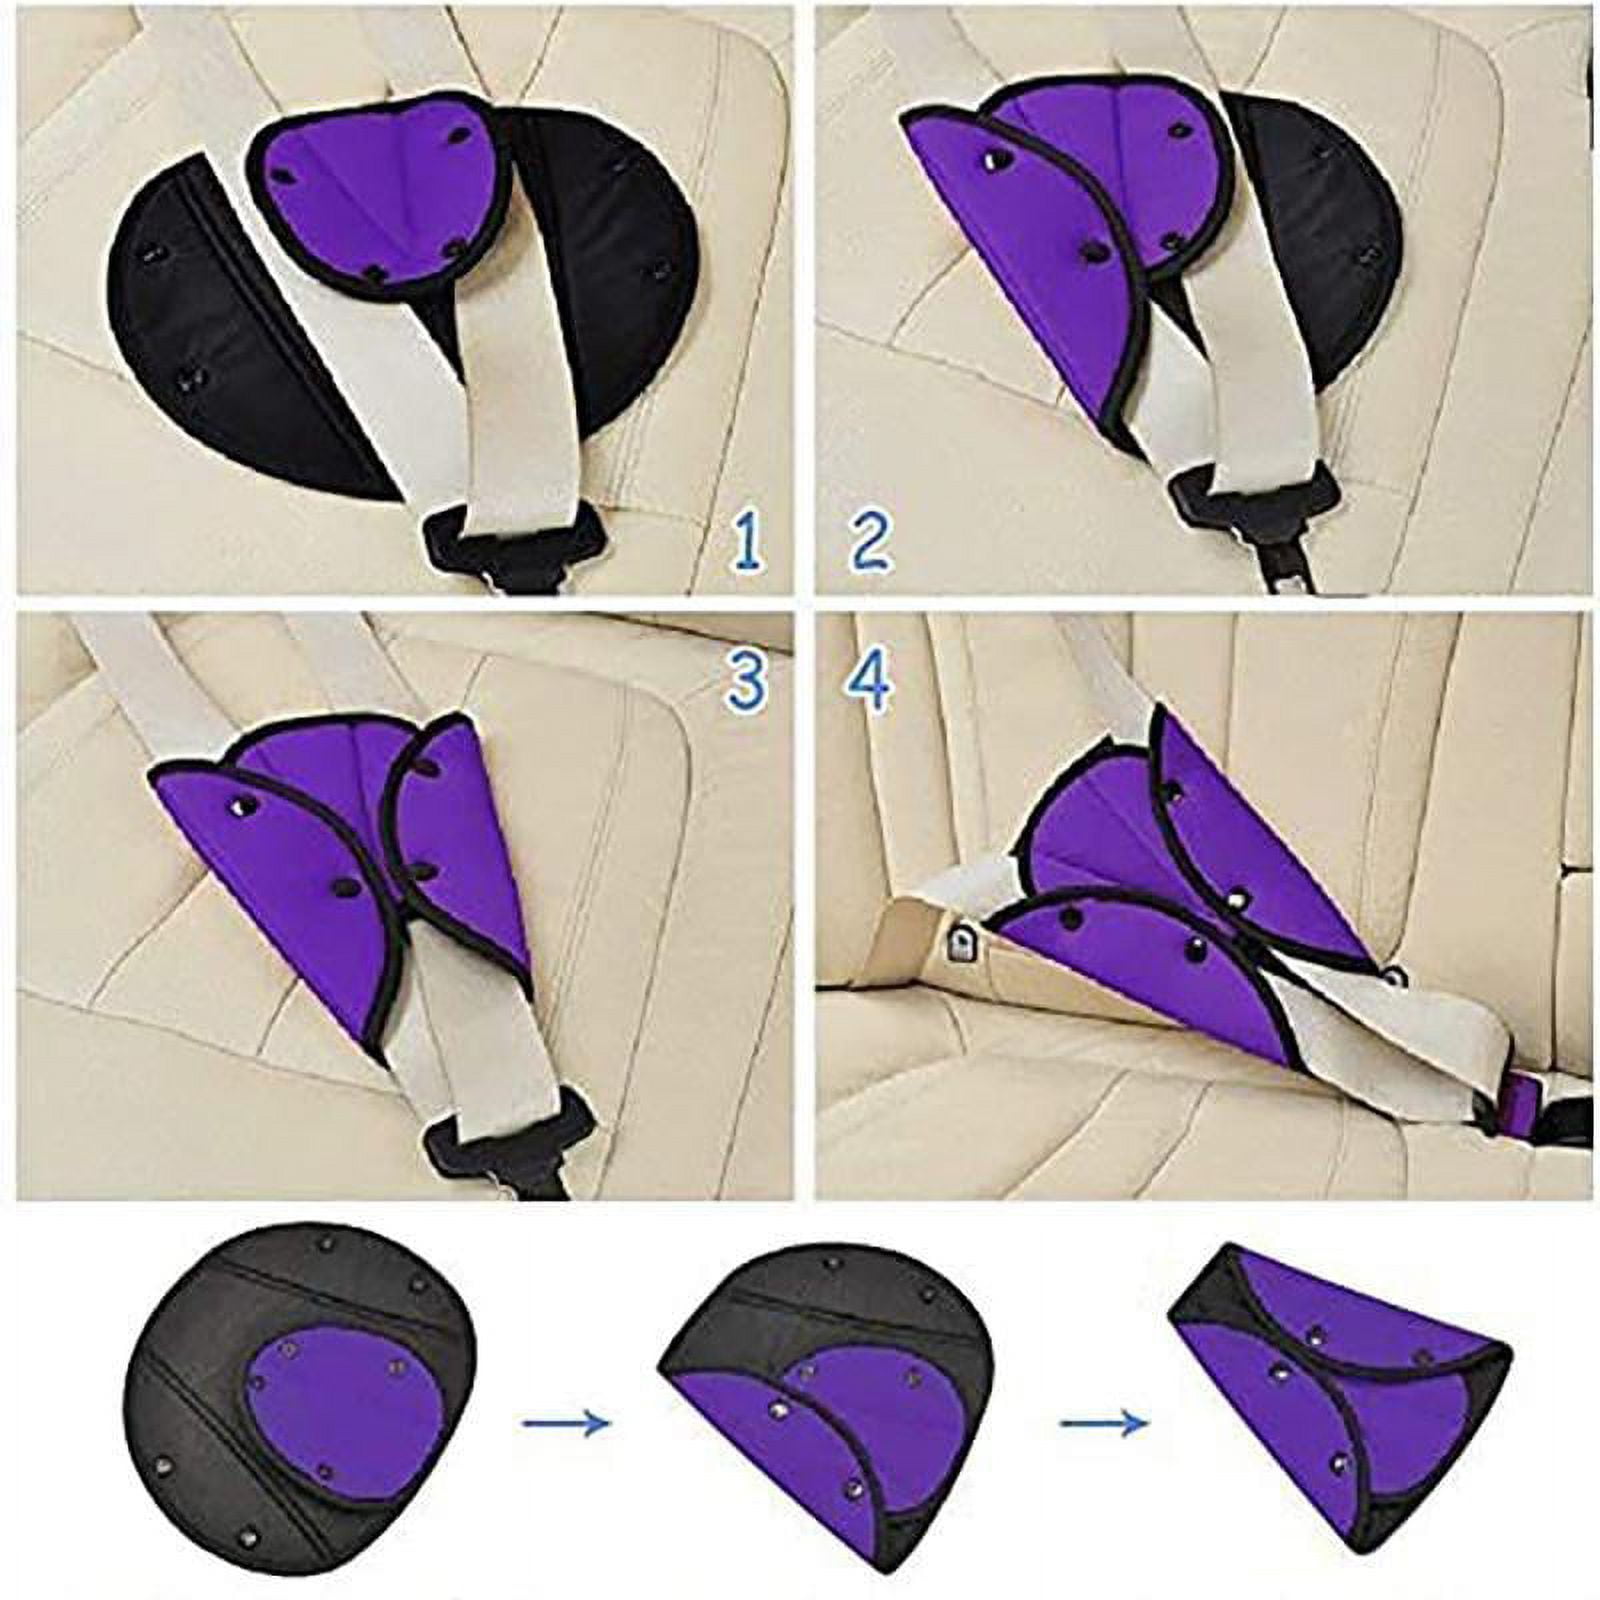 2 x Car Seat Belt Pads Harness Safety Shoulder Strap Cushion Covers kids  AC55